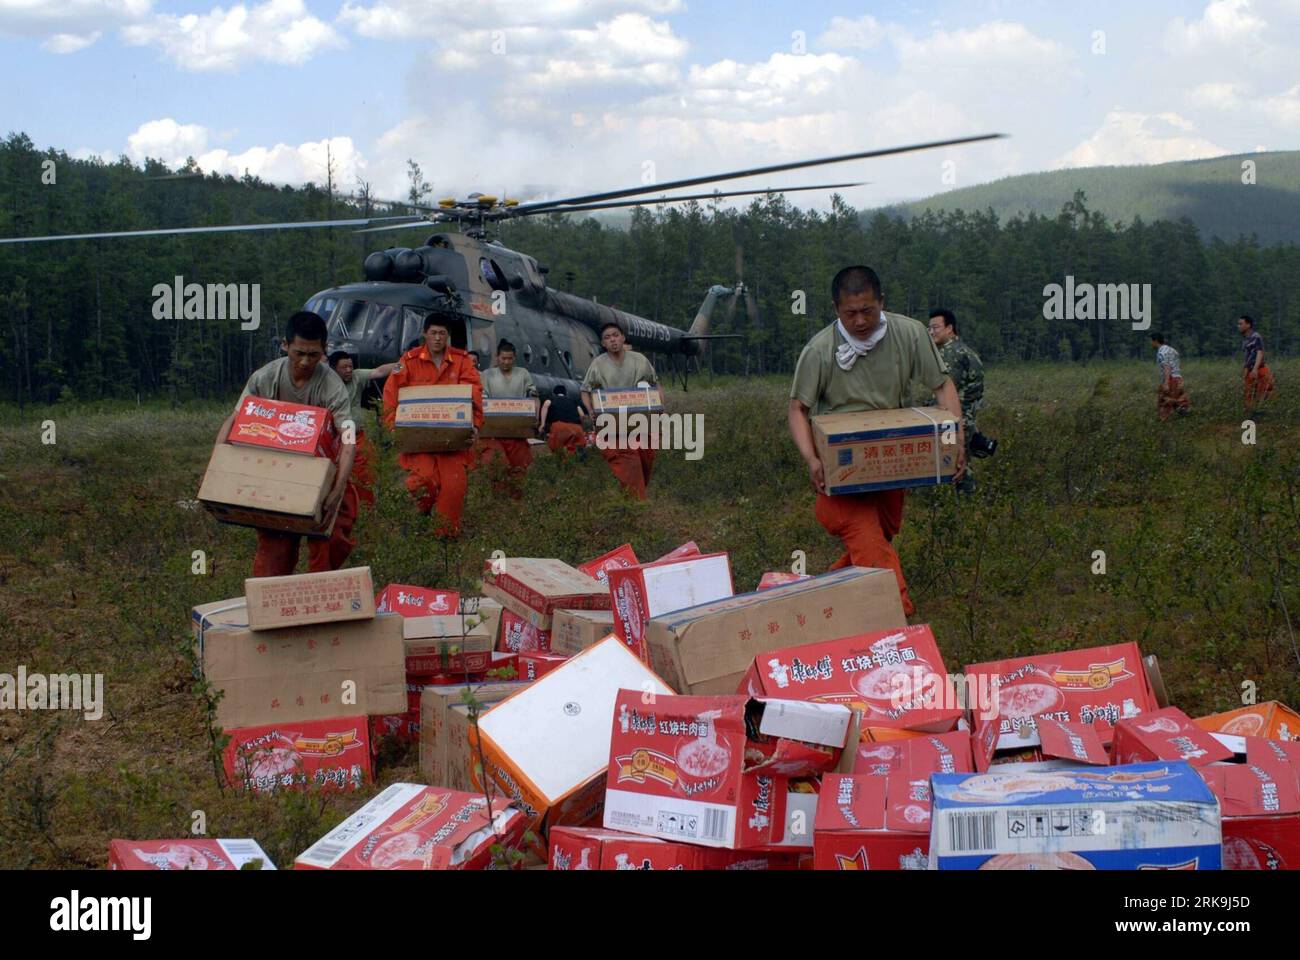 Bildnummer: 54200423  Datum: 03.07.2010  Copyright: imago/Xinhua (100703) -- GREATER HINGGAN MOUNTAINS, July 3, 2010 (Xinhua) -- carry relief goods from a Mi-171 helicopter of Shenyang military command after its landing for the task of fighting against forest fire ravaging the Greater Hinggan Mountains on July 3, 2010. A forest fire was mostly put out Saturday after ravaging the Greater Hinggan Mountains in north China s Inner Mongolian Autonomous Region and Heilongjiang Province for a week, fire fighters said. (Xinhua/Wang Song) (zx) (4)CHINA-GREATER HINGGAN MOUNTAINS-FOREST FIRE-MI-171 HELIC Stock Photo